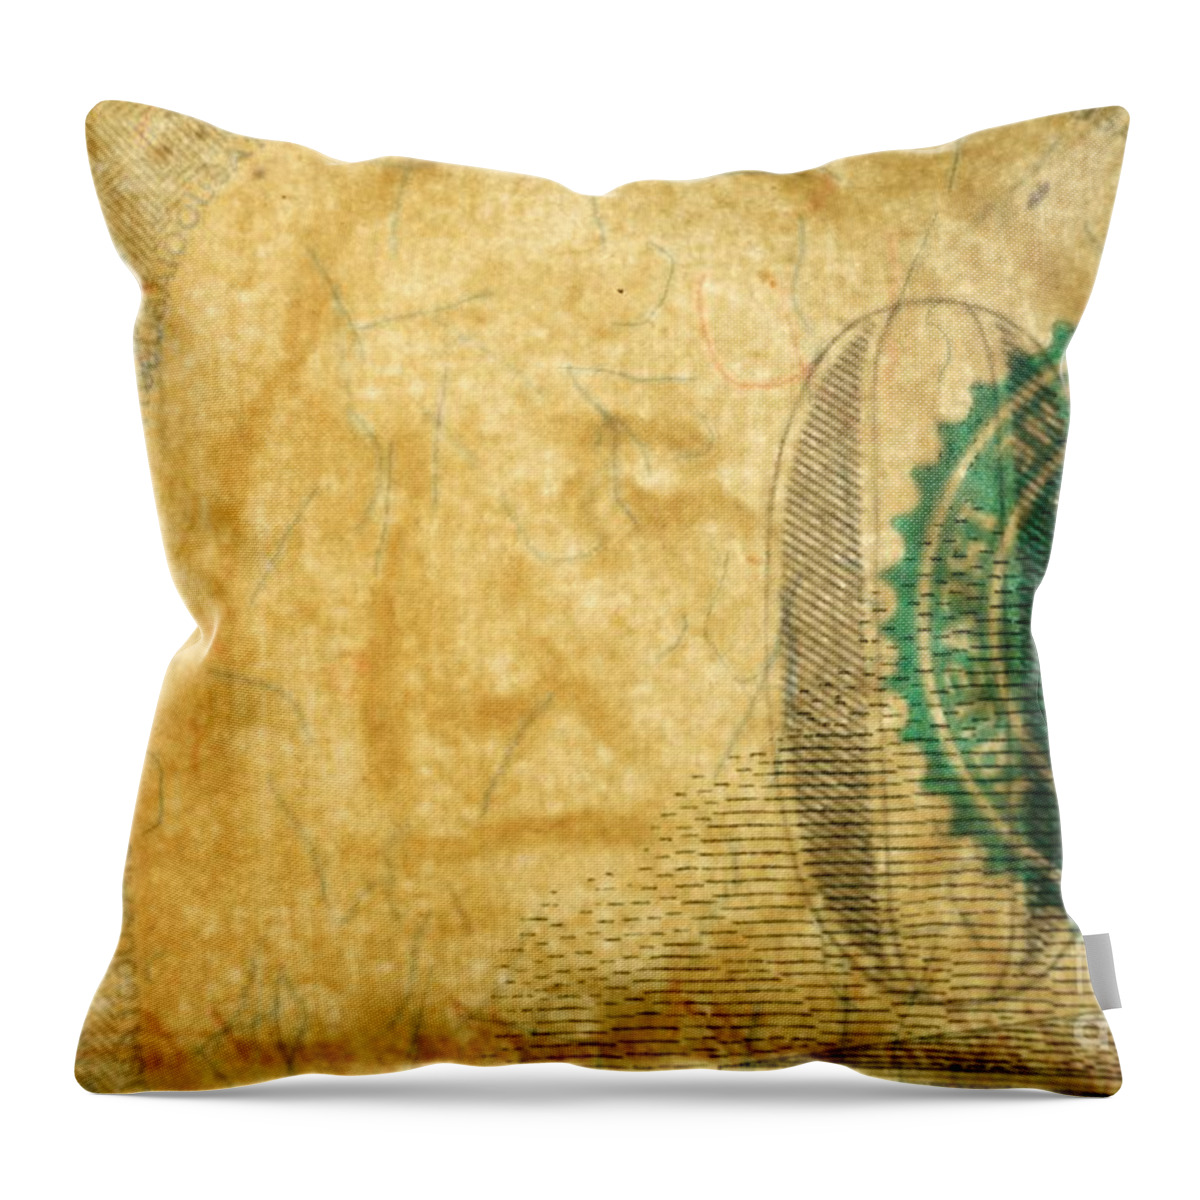 New Throw Pillow featuring the photograph Us 100 Dollar Bill Security Features, 4 by Ted Kinsman